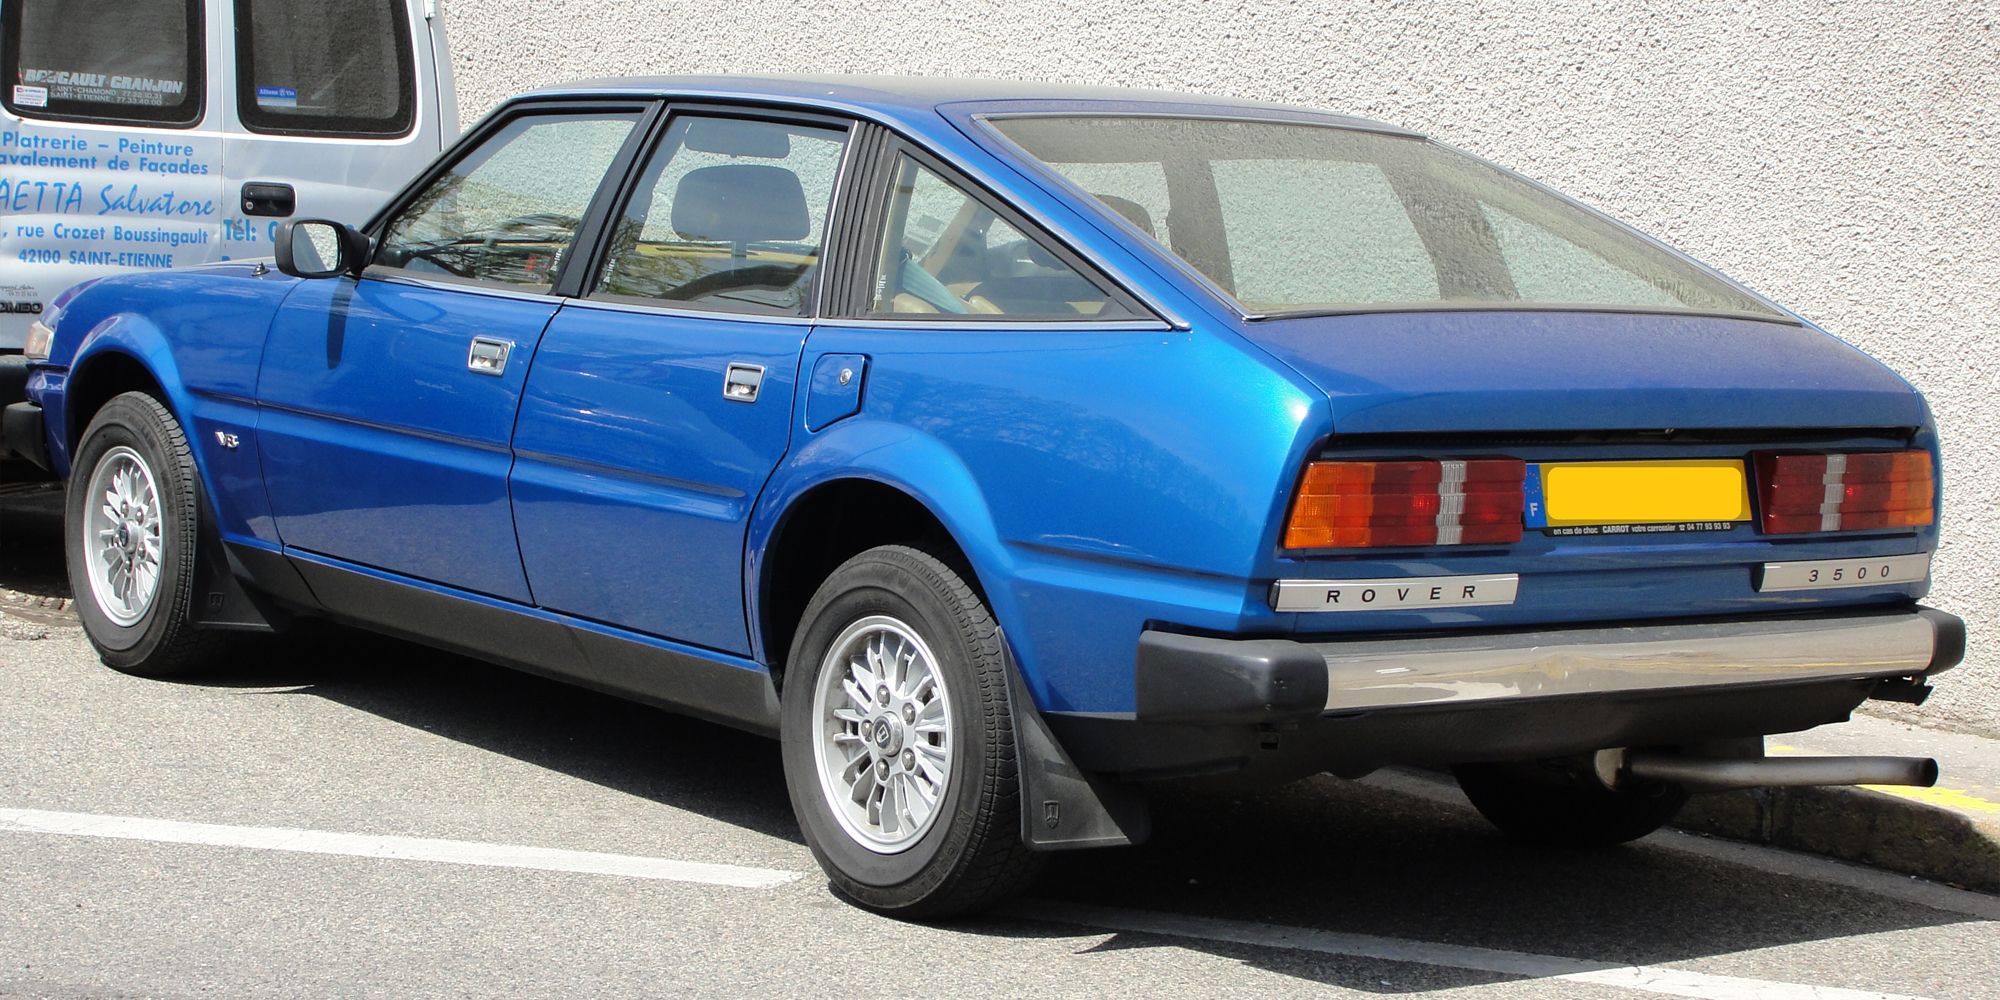 The rear of a blue SD1